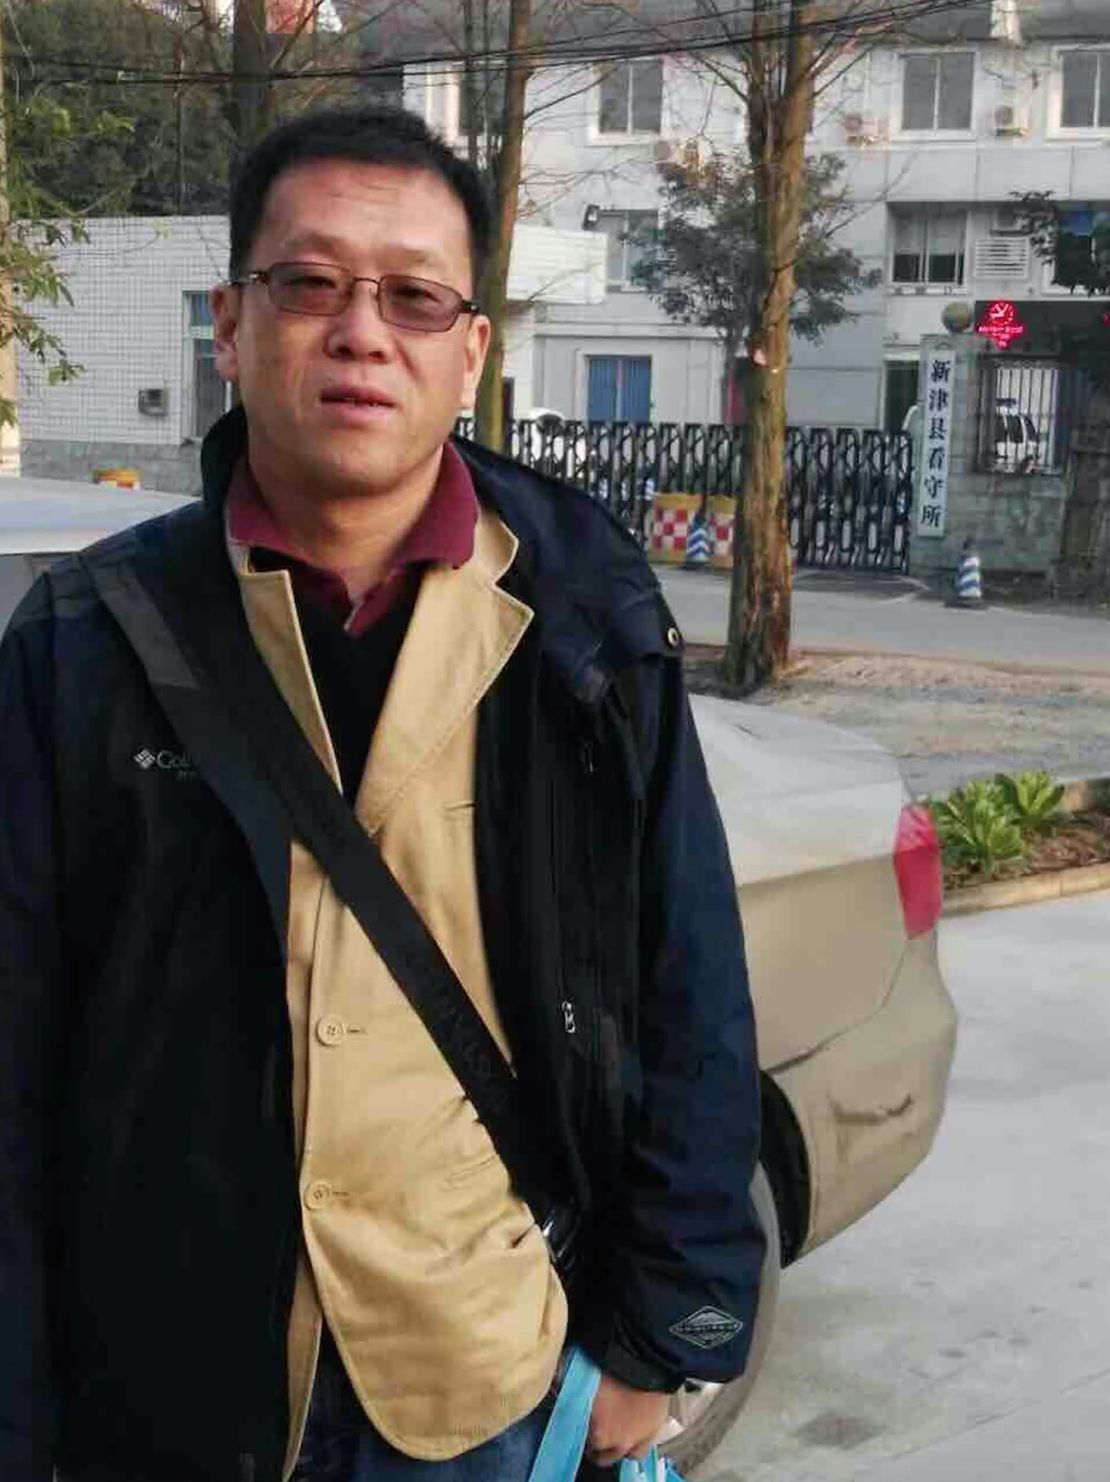 Sui Muqing, a lawyer, was detained from July 10, 2015 until January 6, 2016.